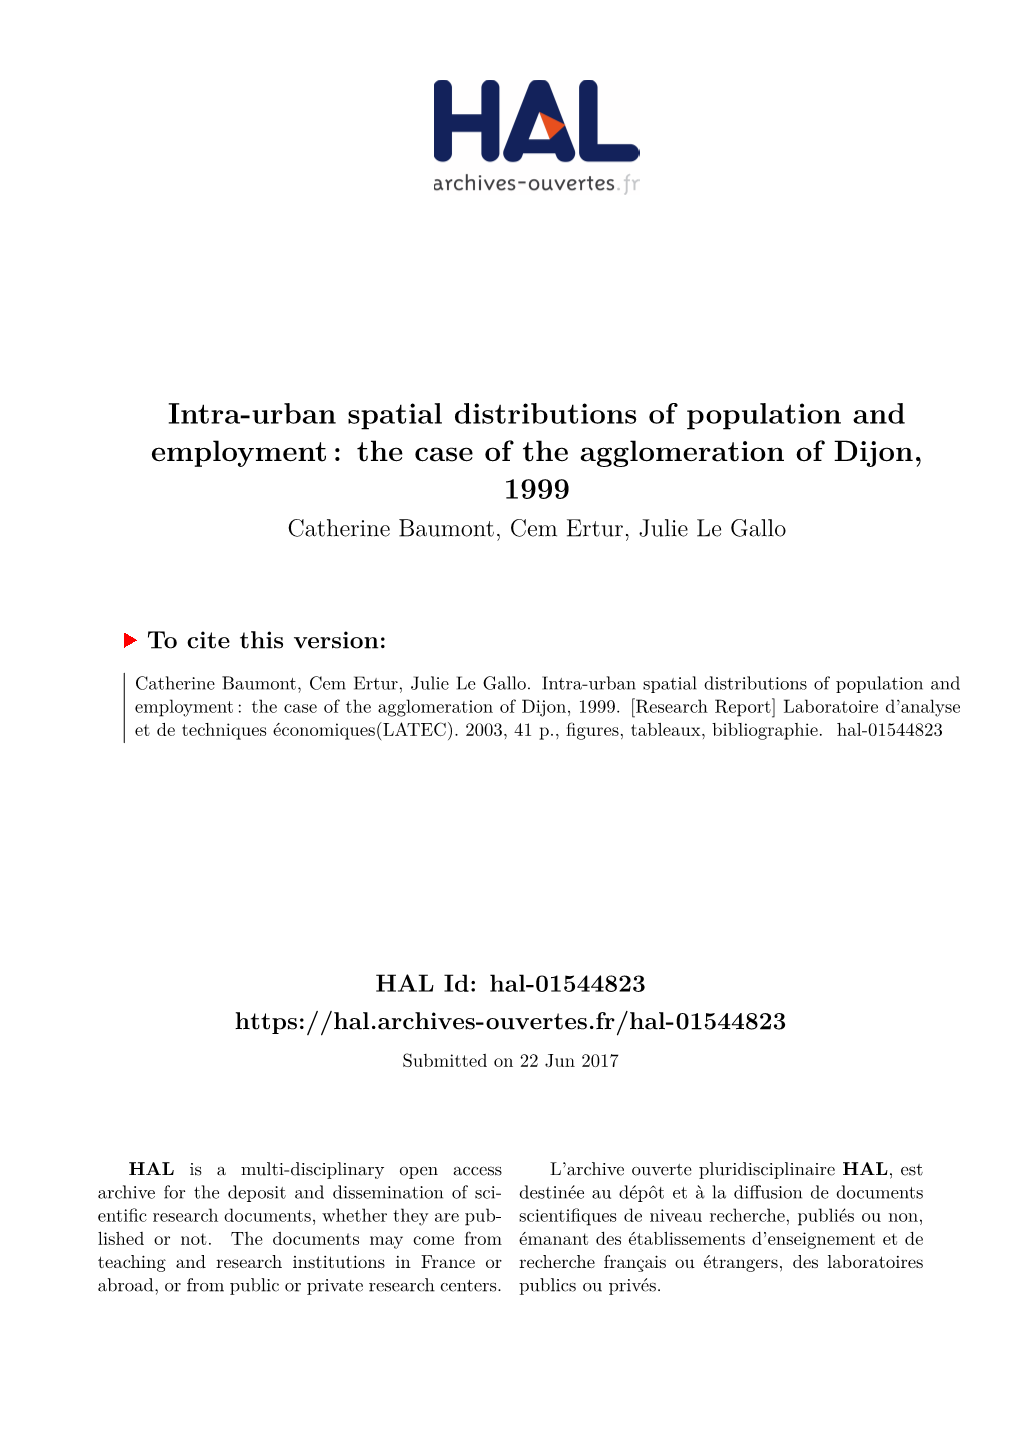 Intra-Urban Spatial Distributions of Population and Employment : the Case of the Agglomeration of Dijon, 1999 Catherine Baumont, Cem Ertur, Julie Le Gallo